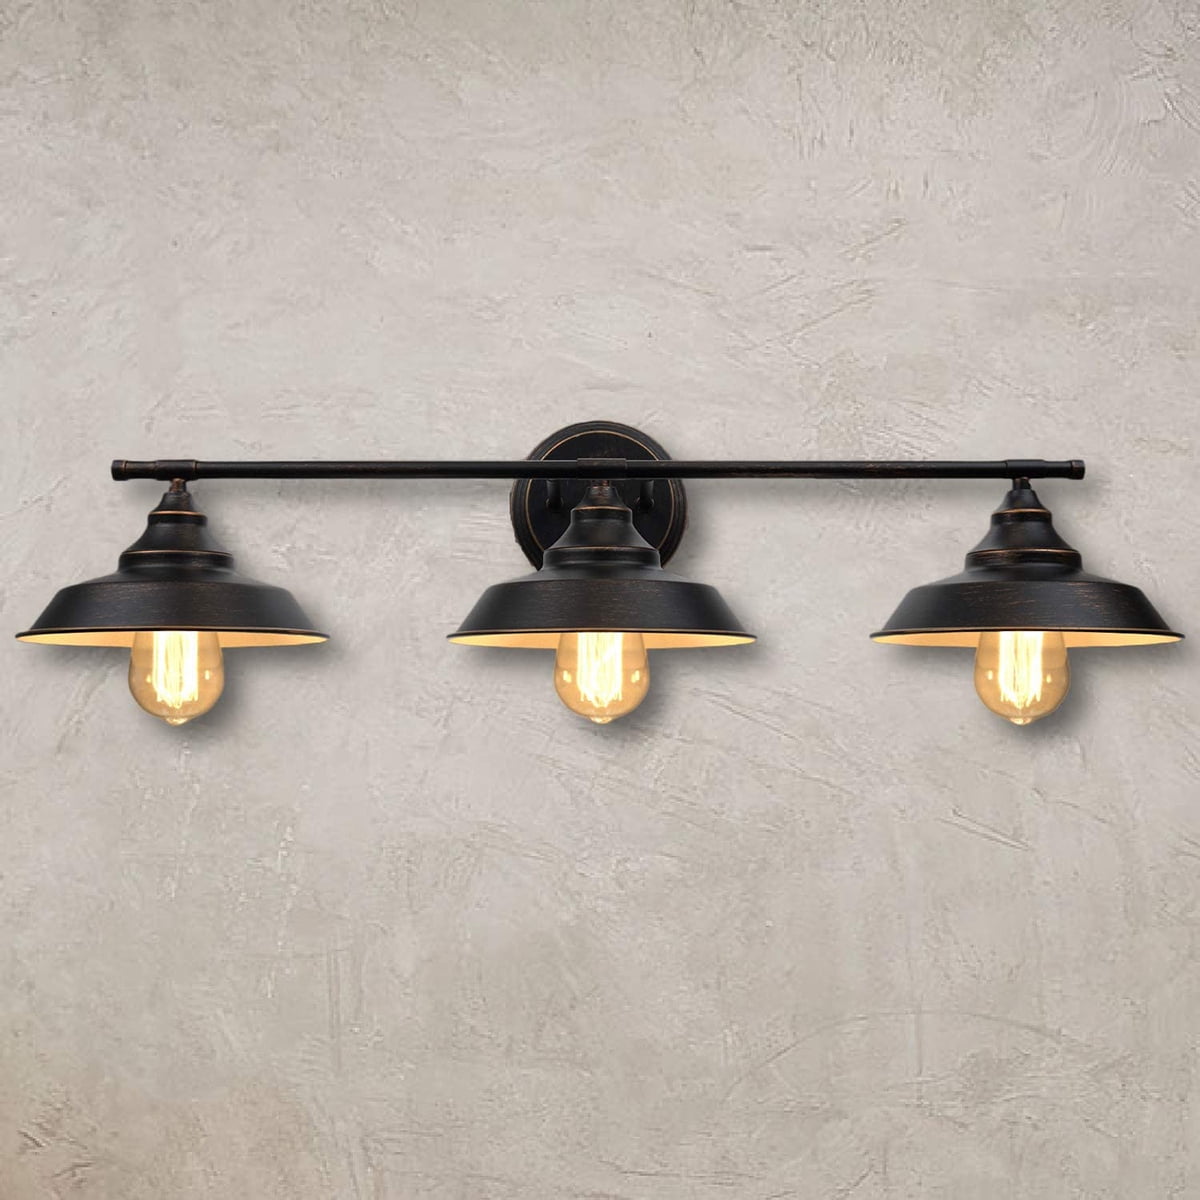 Bathroom Vanity Light 2 3 Wall Sconce Industrial Mount Lamp Shade Farmhouse Rustic Style Vintage Lighting Fixture Com - 2 Light Wall Sconce With Shade